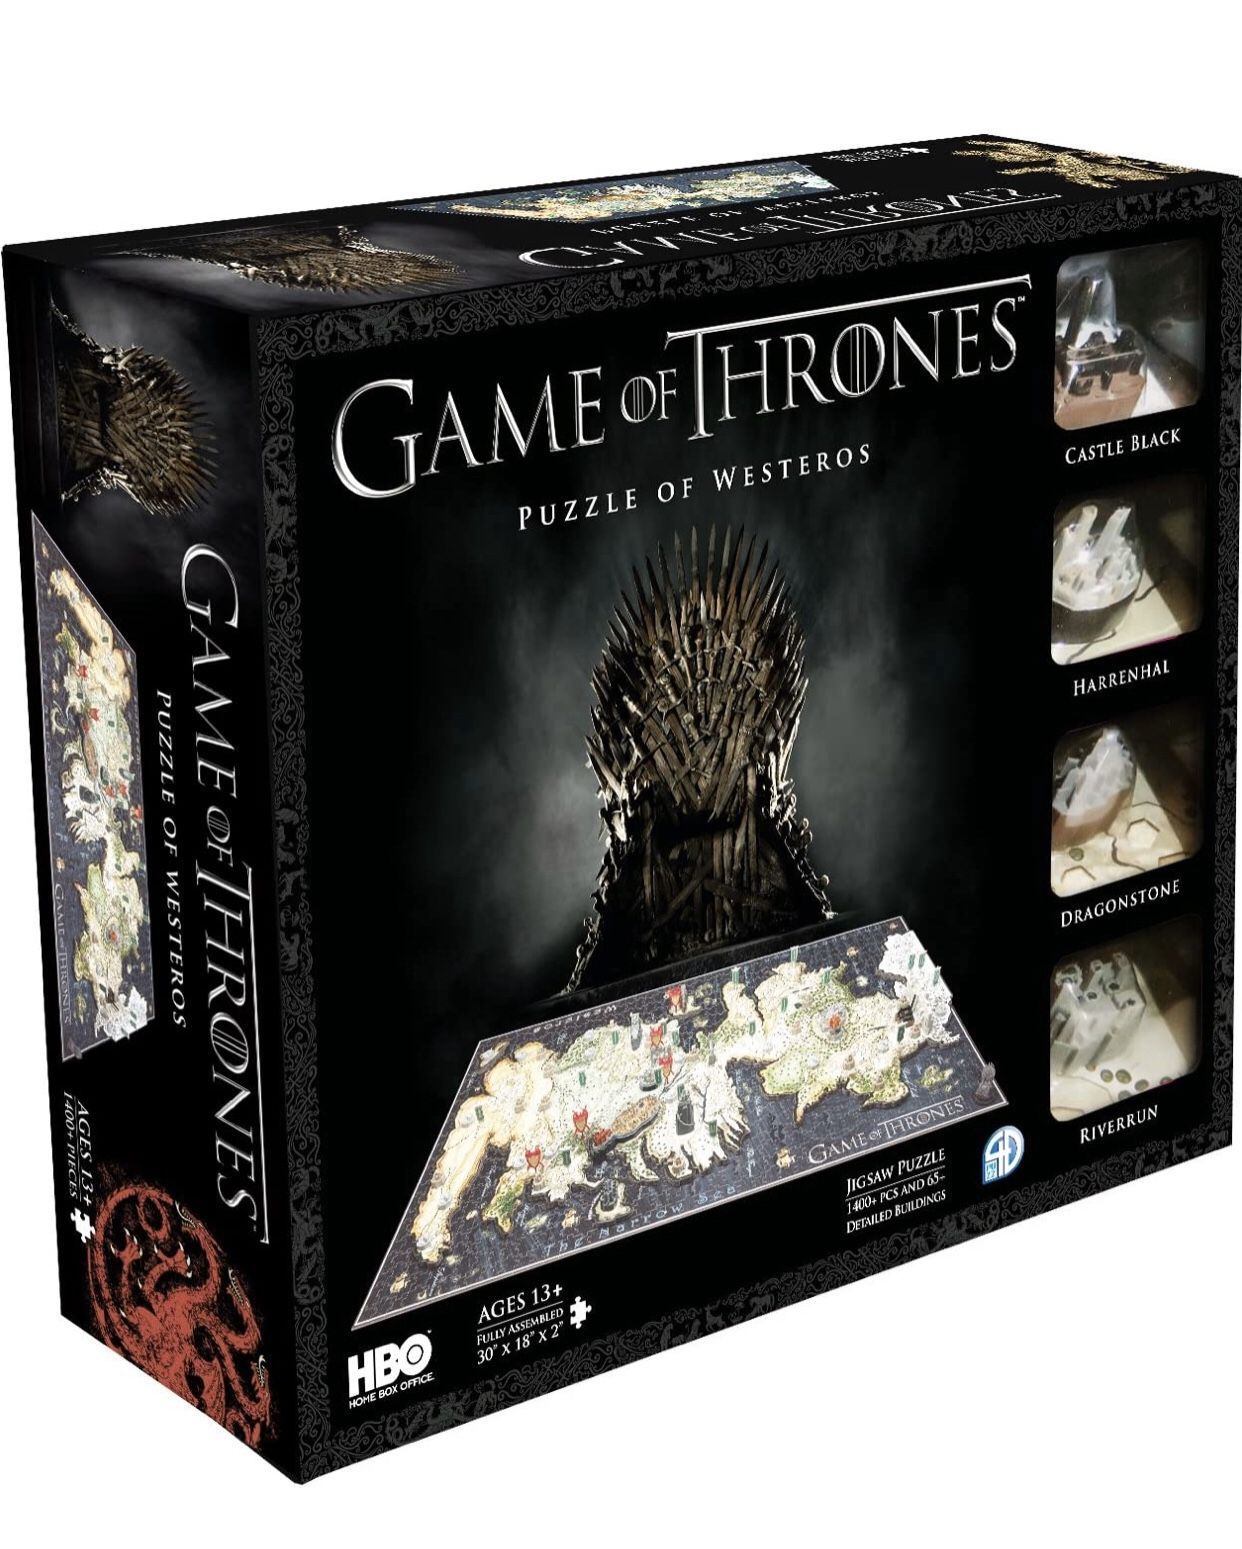 Game of Thrones 1400+ Puzzle of Westeros